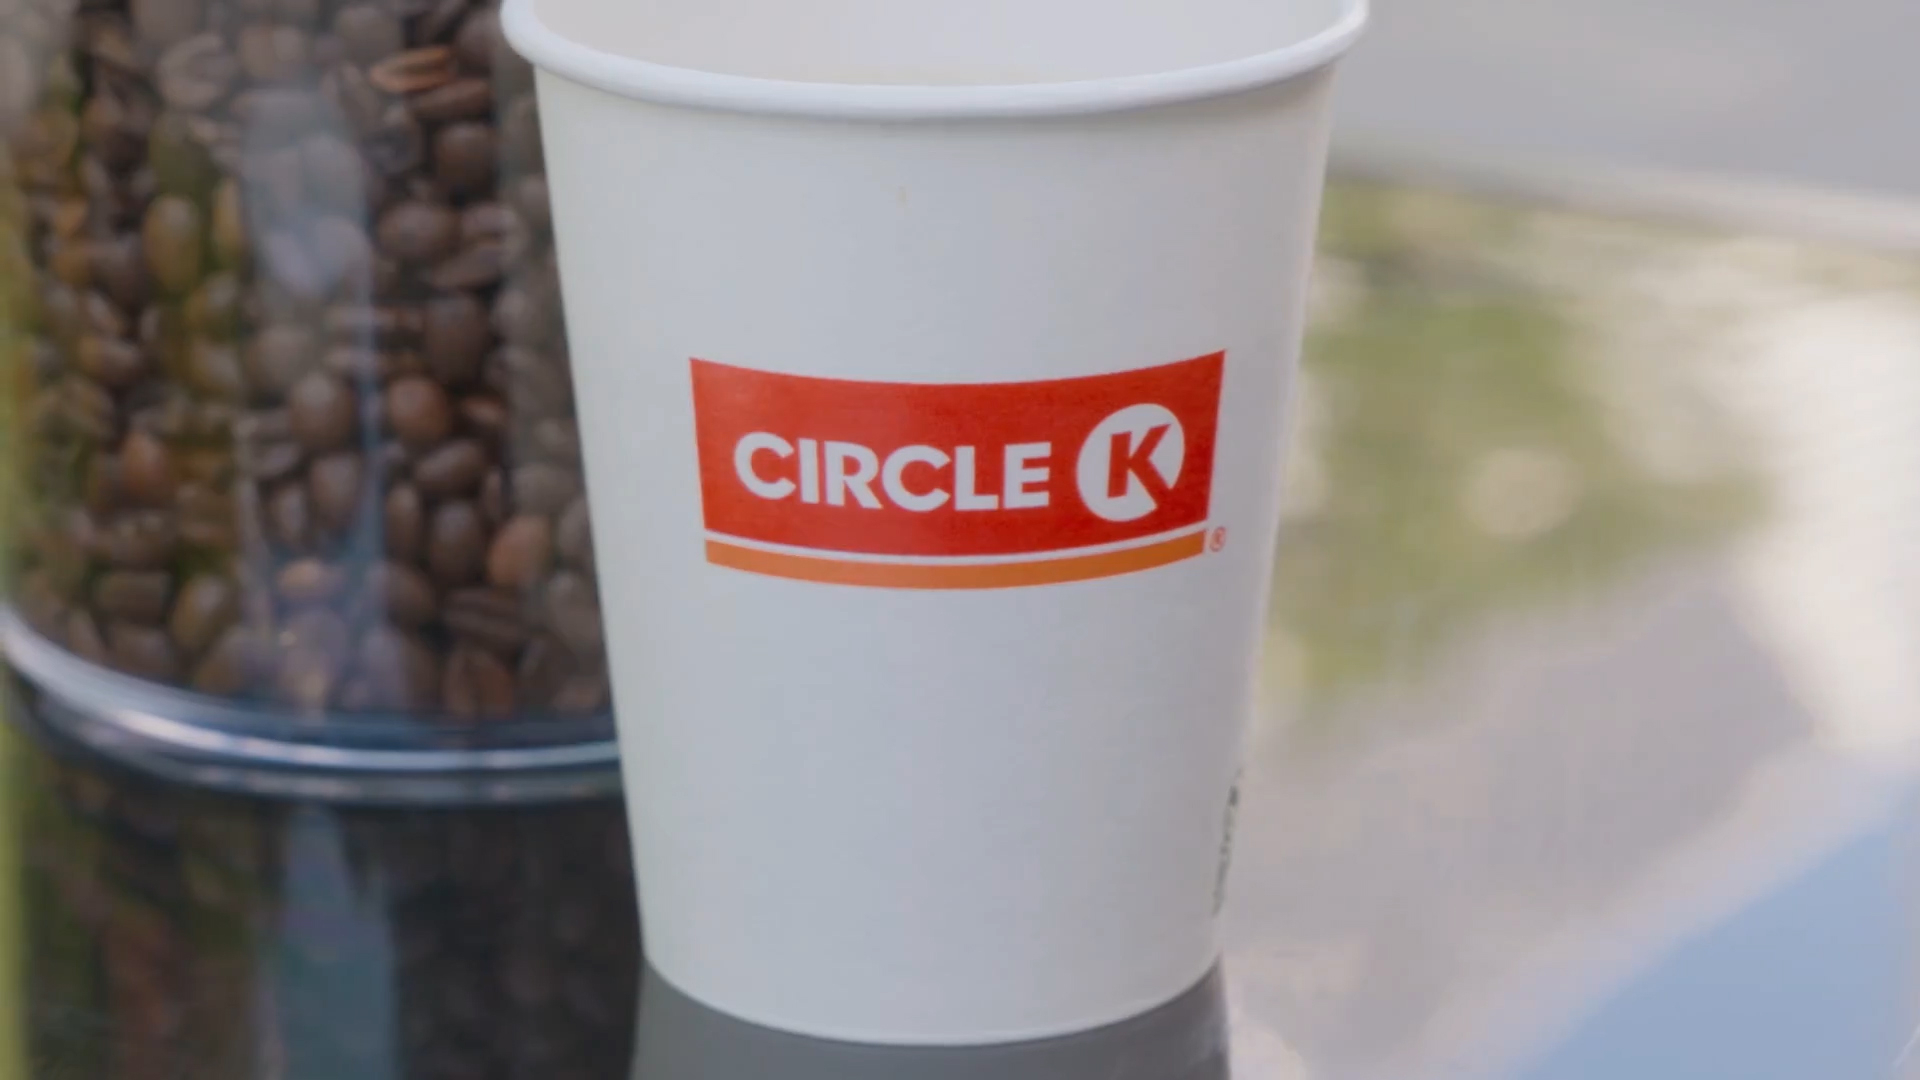 A recent blind tasting of the brand’s in-store coffee left participating coffee lovers shocked when they learned they were drinking Circle K coffee. The brand is allowing everyone nationwide to try it for free on Jan. 25.